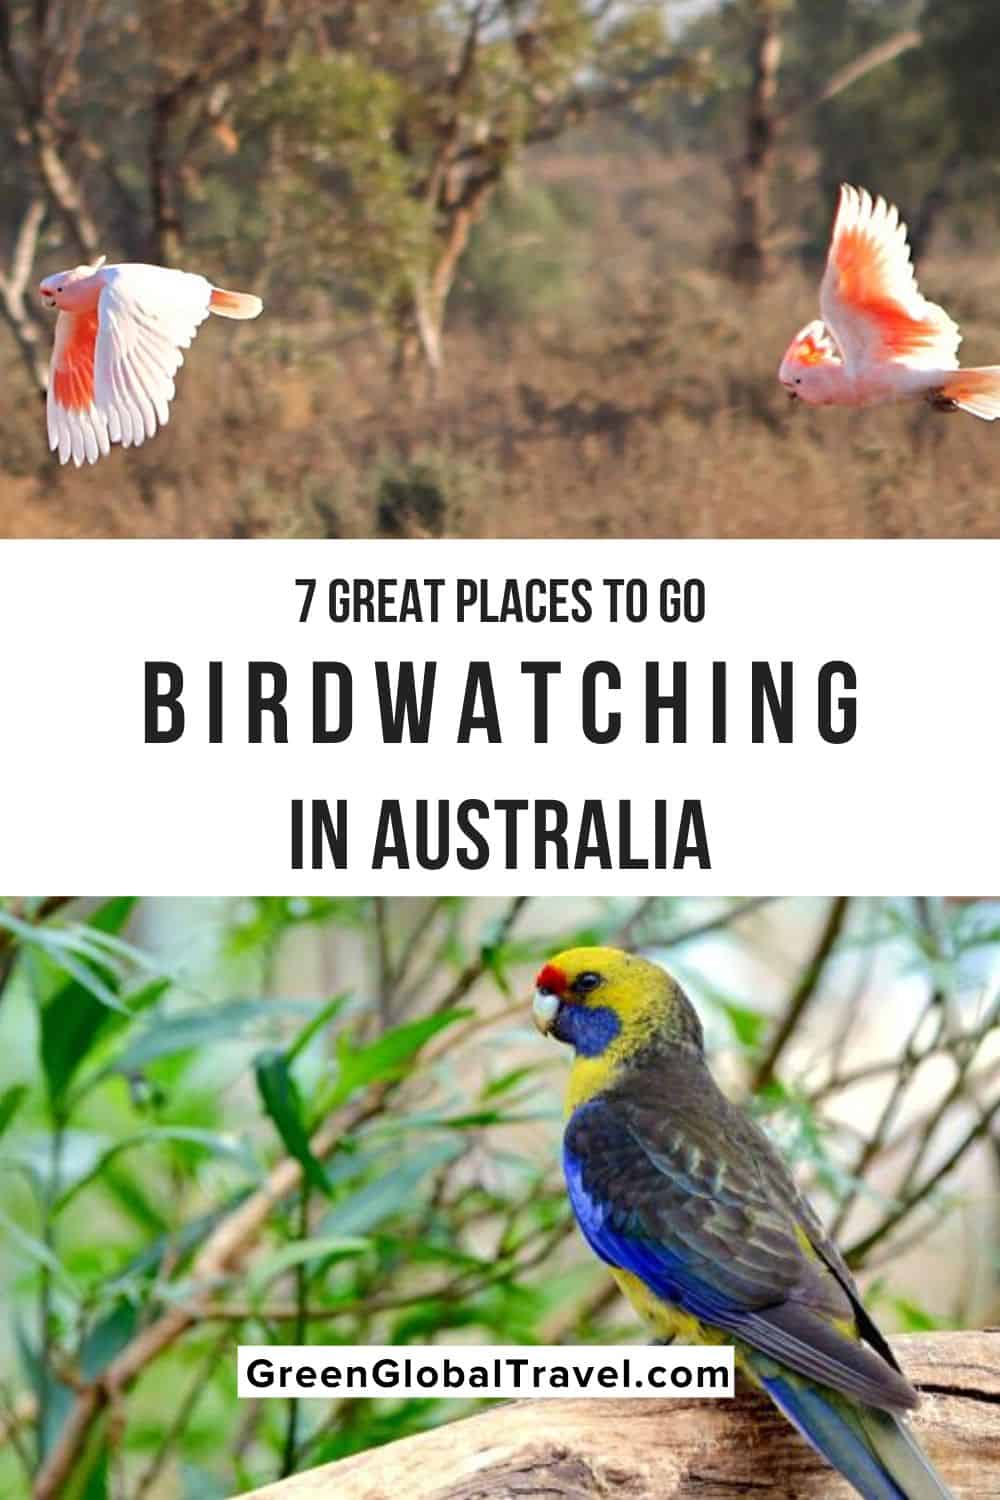 7 Great Places to Go Birdwatching in Australia including North Queensland, Kakadu National Park, Mungo National Park, Tasmania and more!